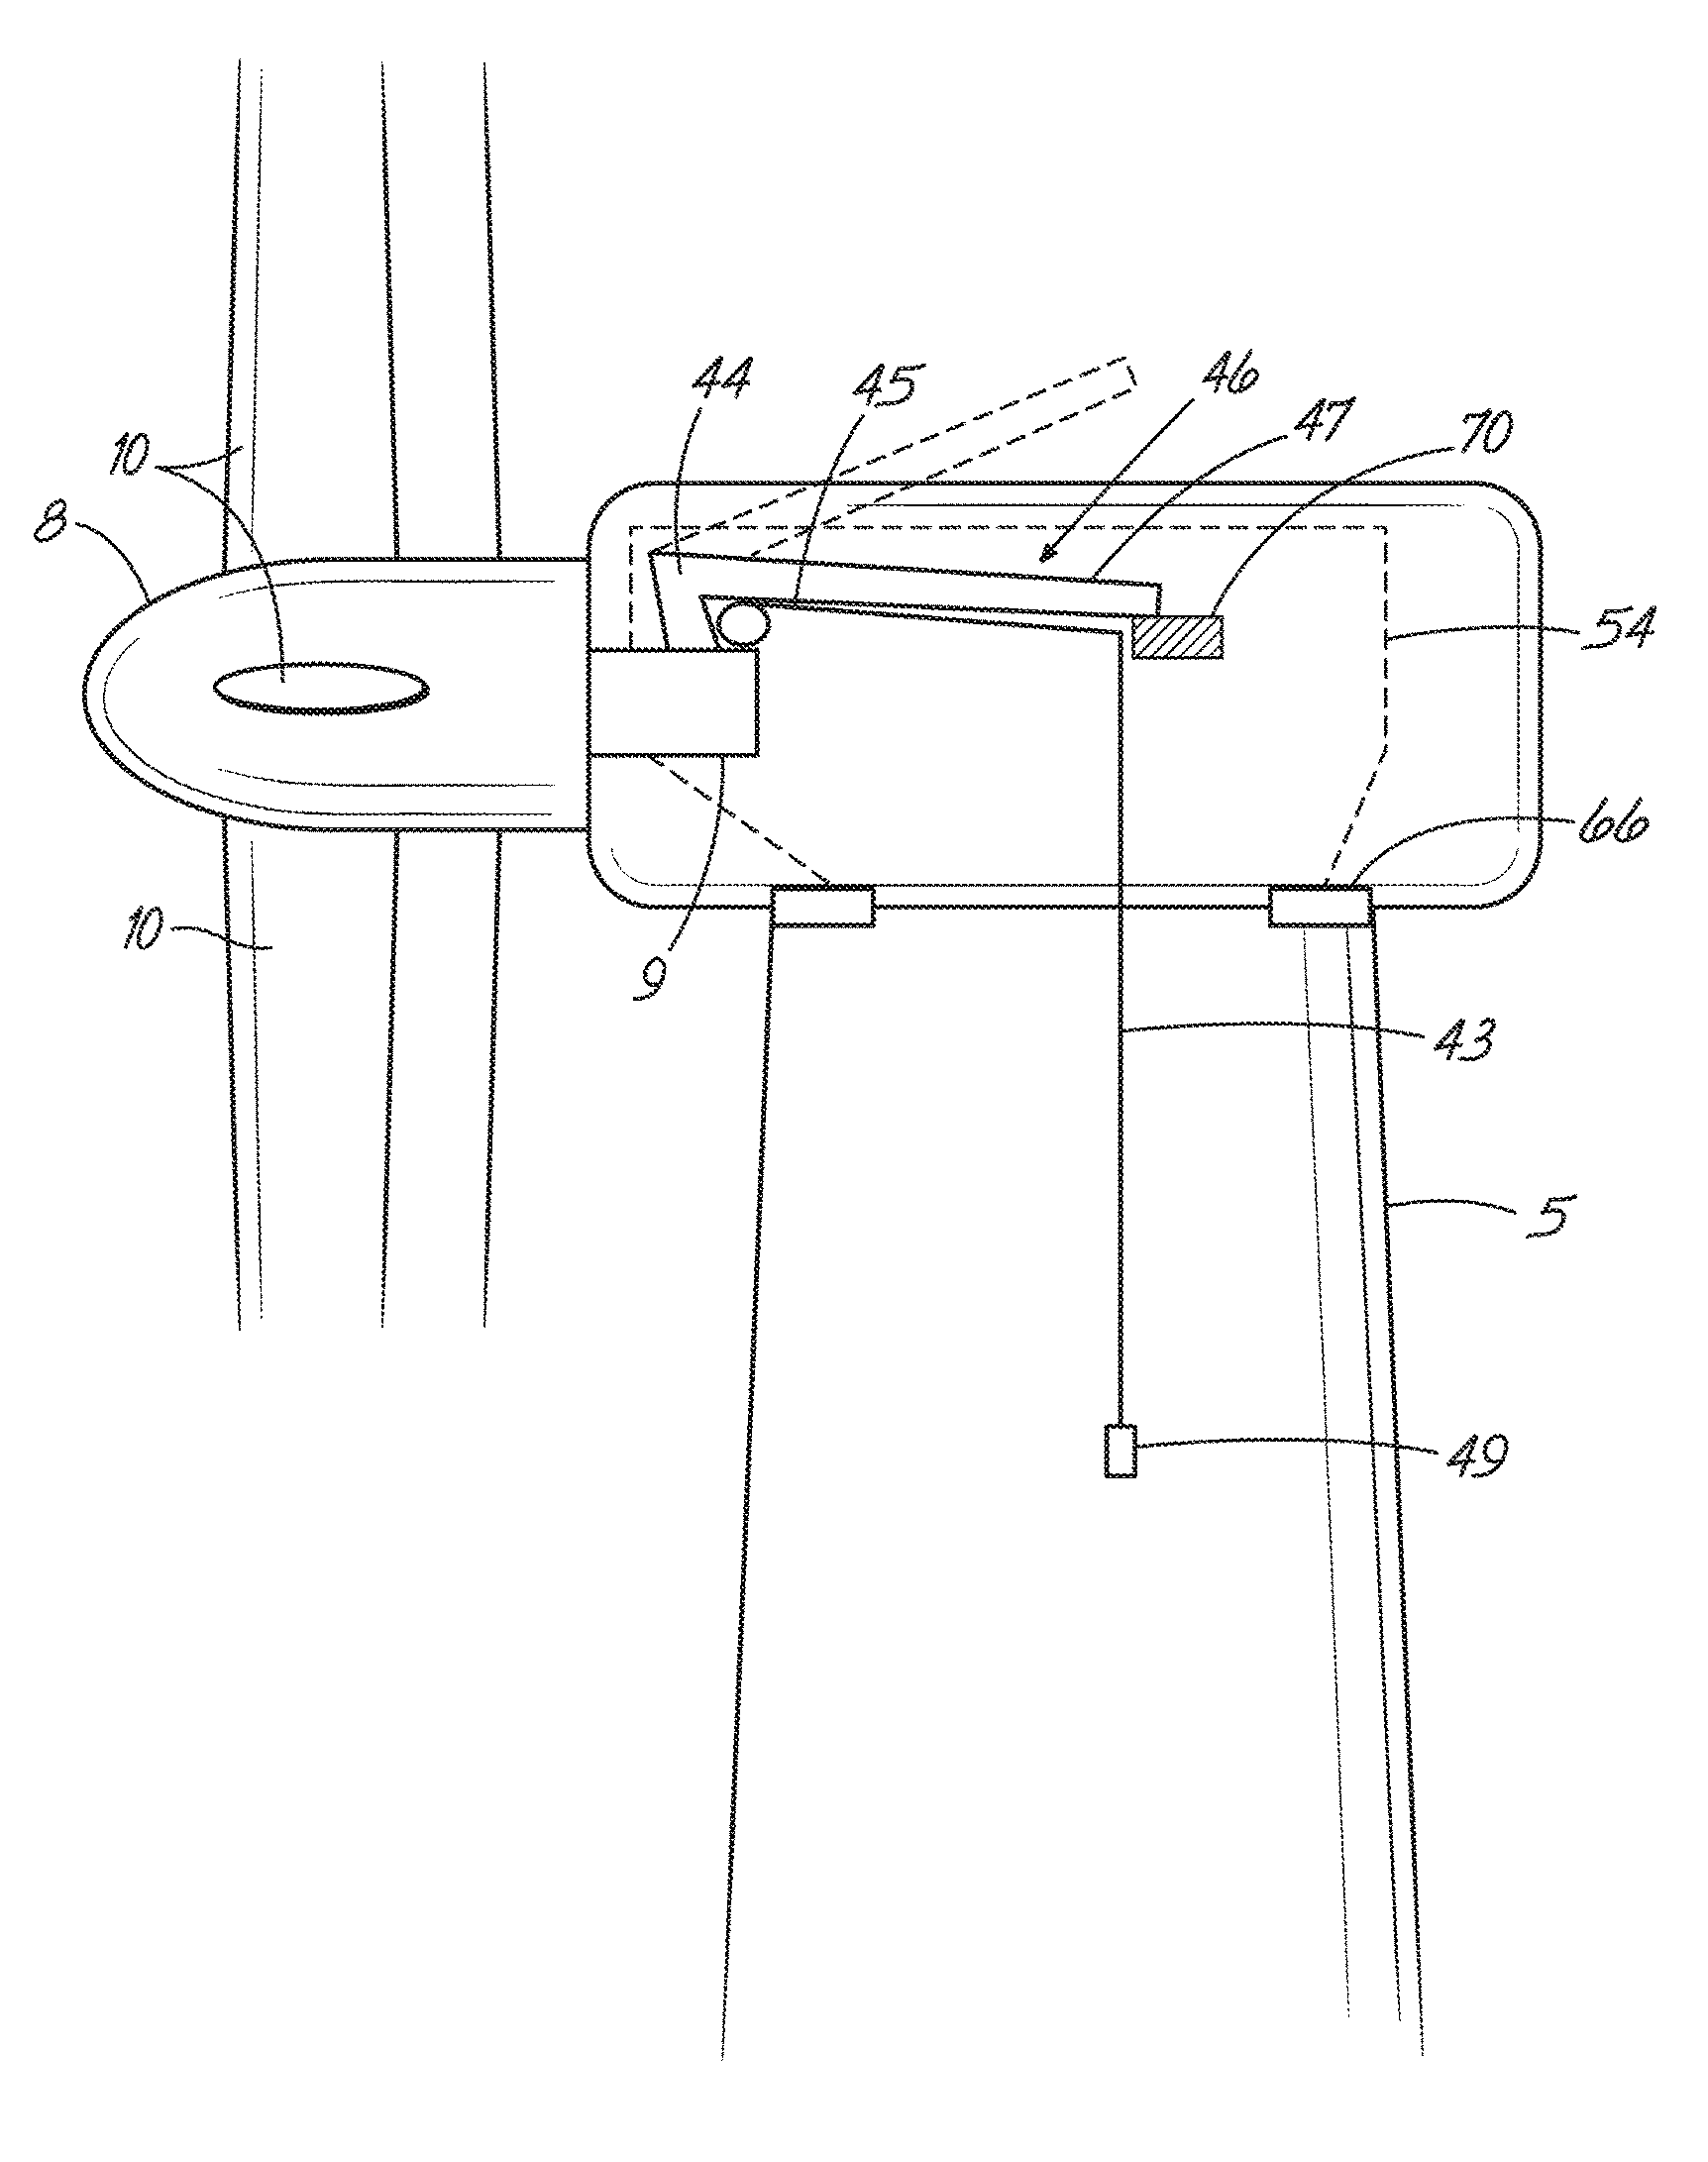 A nacelle for a wind turbine generator including lifting apparatus